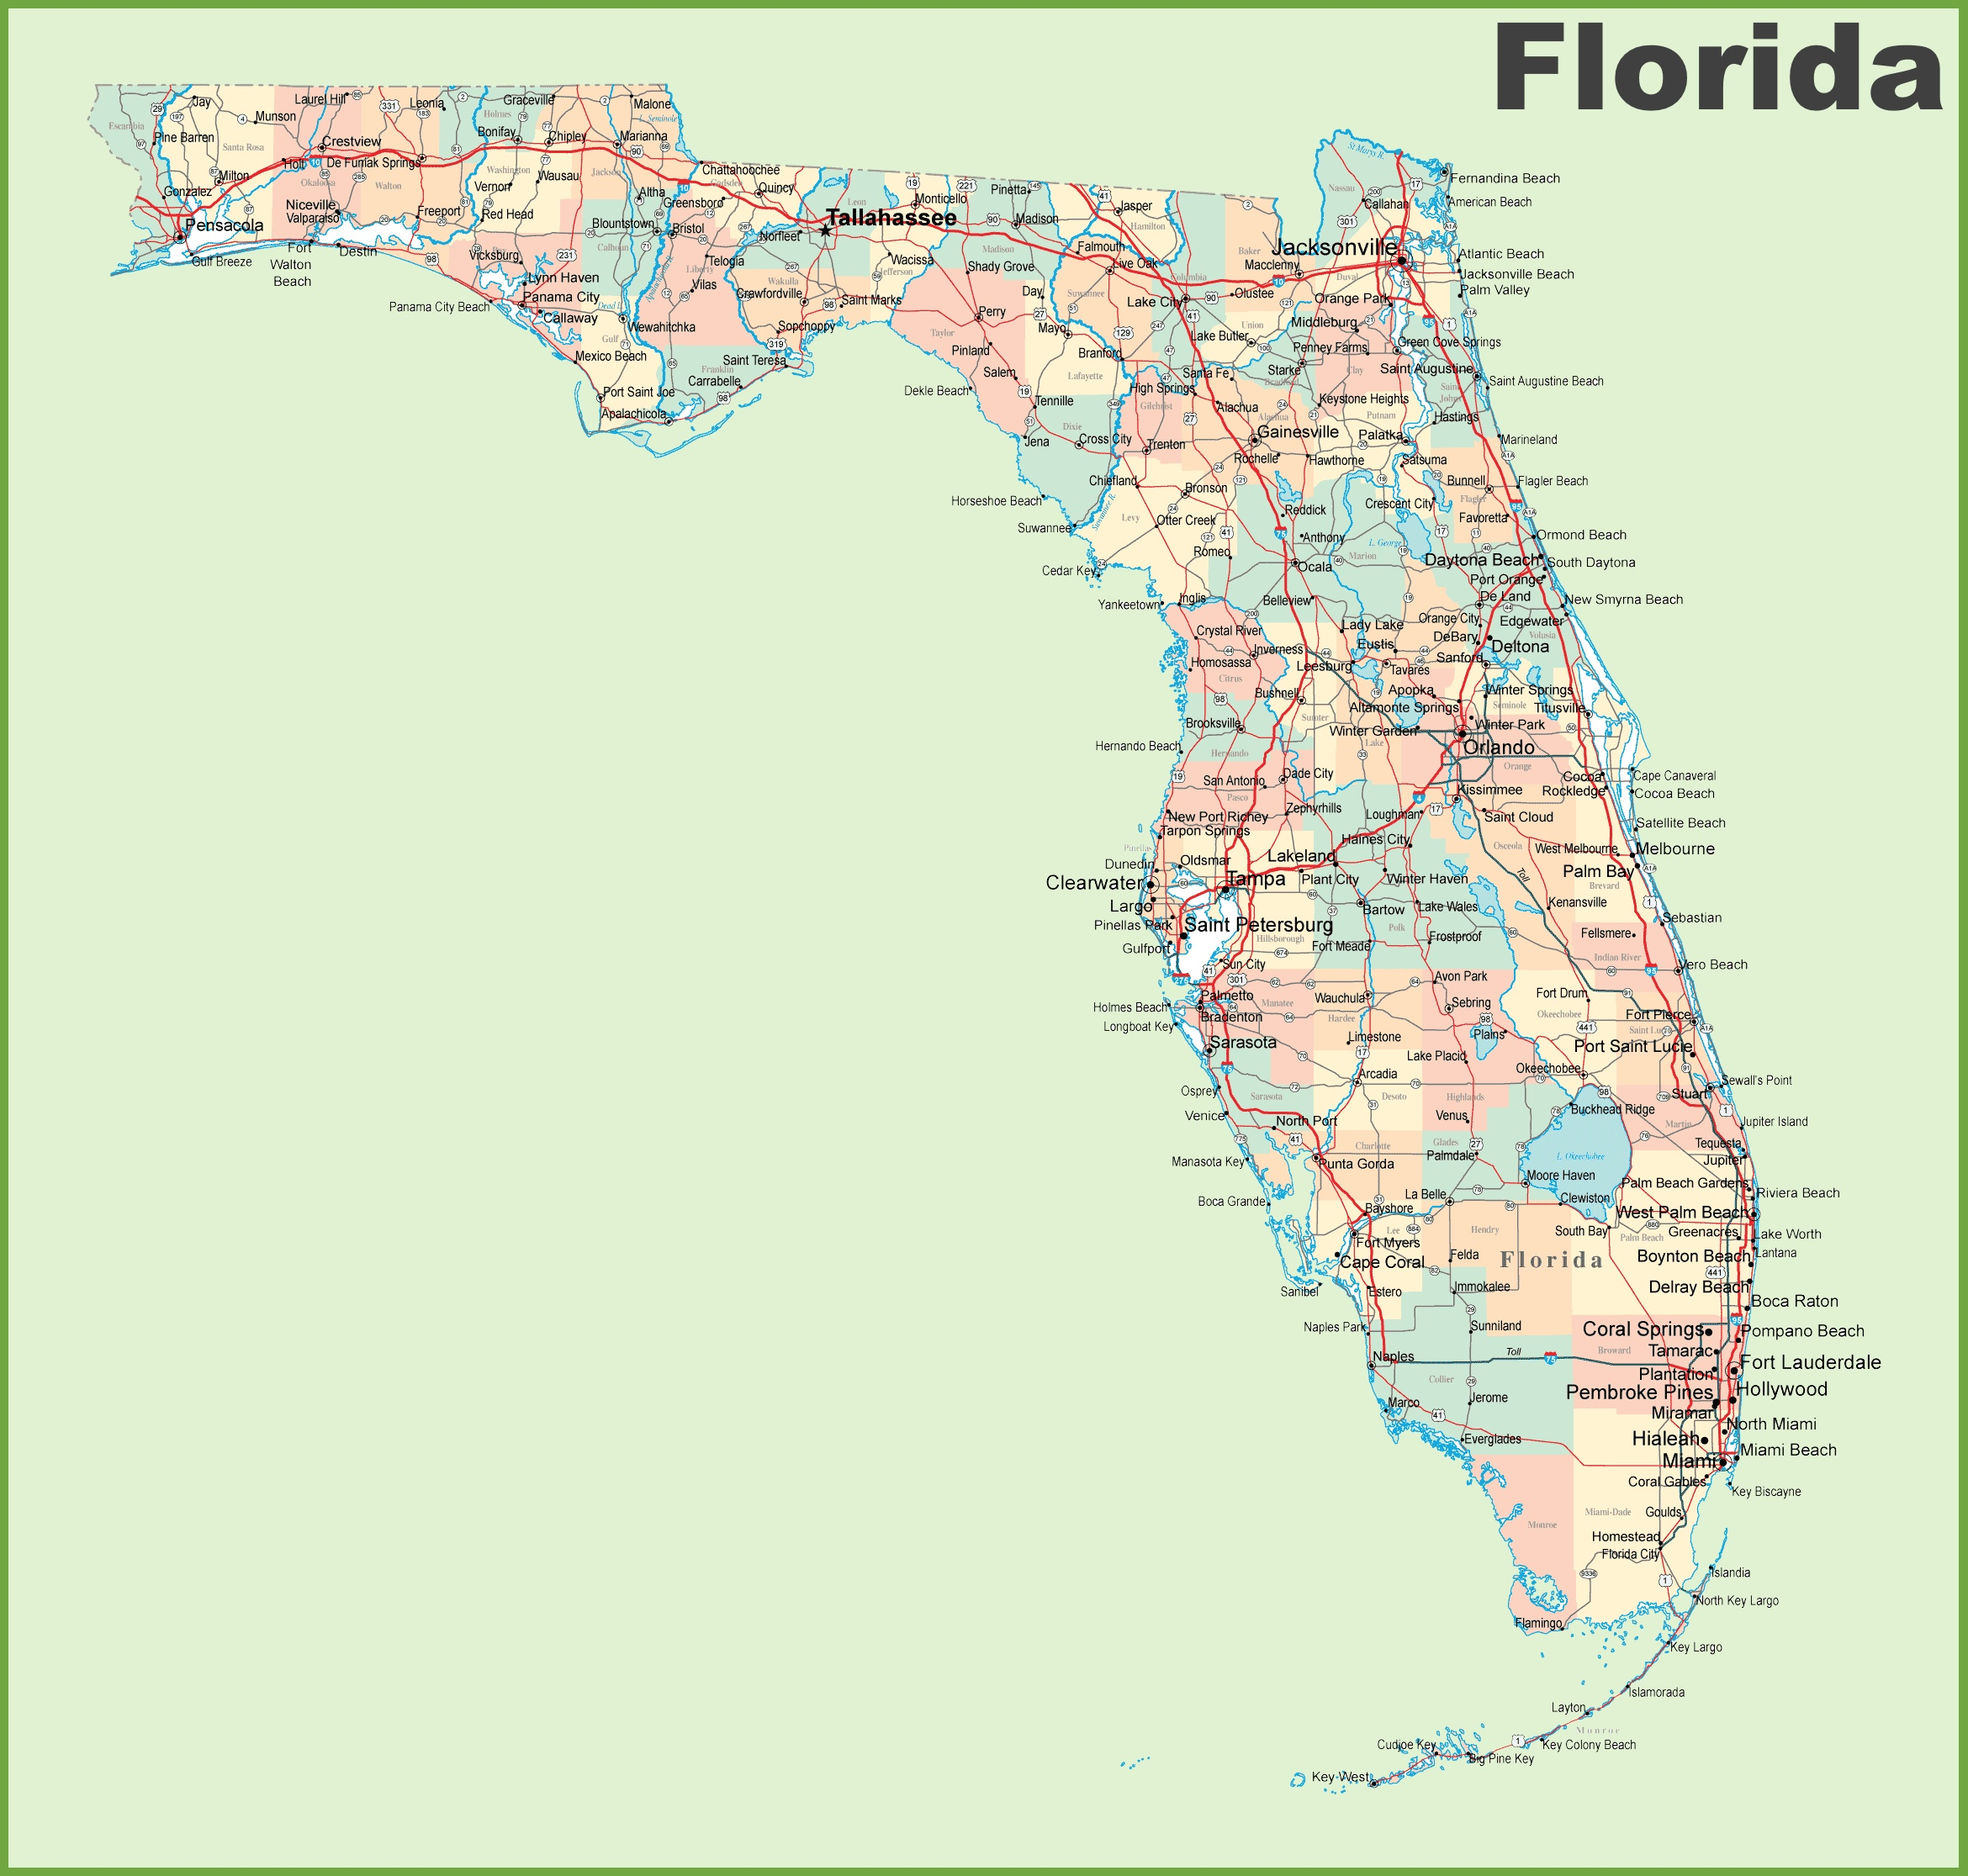 Fla Maps Google And Travel Information | Download Free Fla Maps Google - Google Maps Stuart Florida